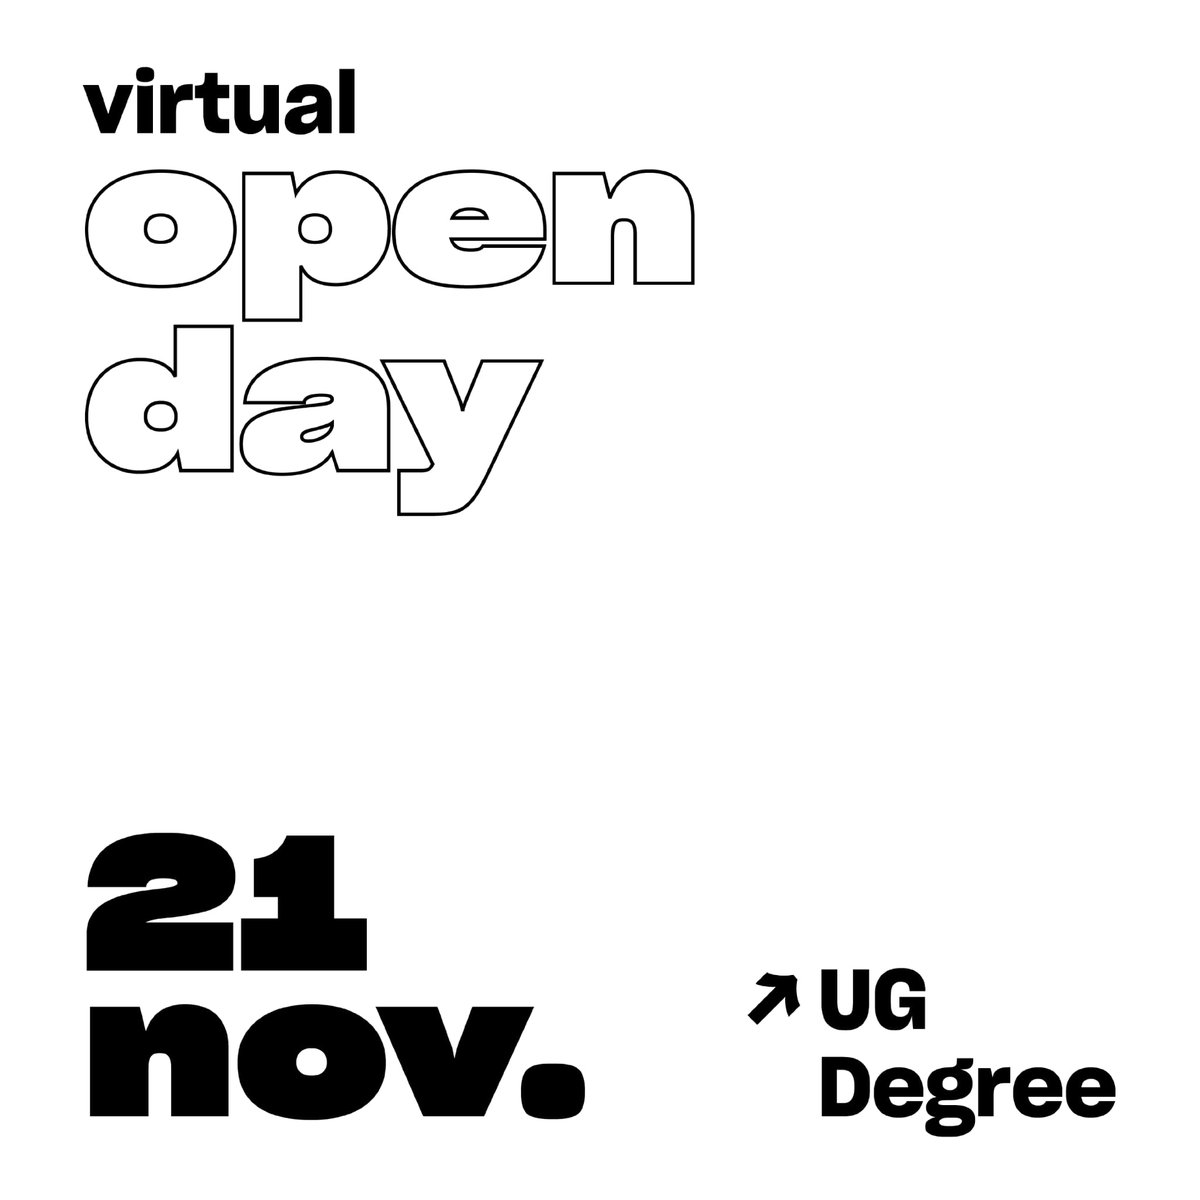 💻 VIRTUAL OPEN DAY.

On Saturday, November 21st, you will have a unique opportunity to get to know more about the Official Undergraduate Degree in Design offered at ESDi.

Register to join the webinar 👉bit.ly/2UJCJFn

#virtualopenday #openday #degreeindesign #design